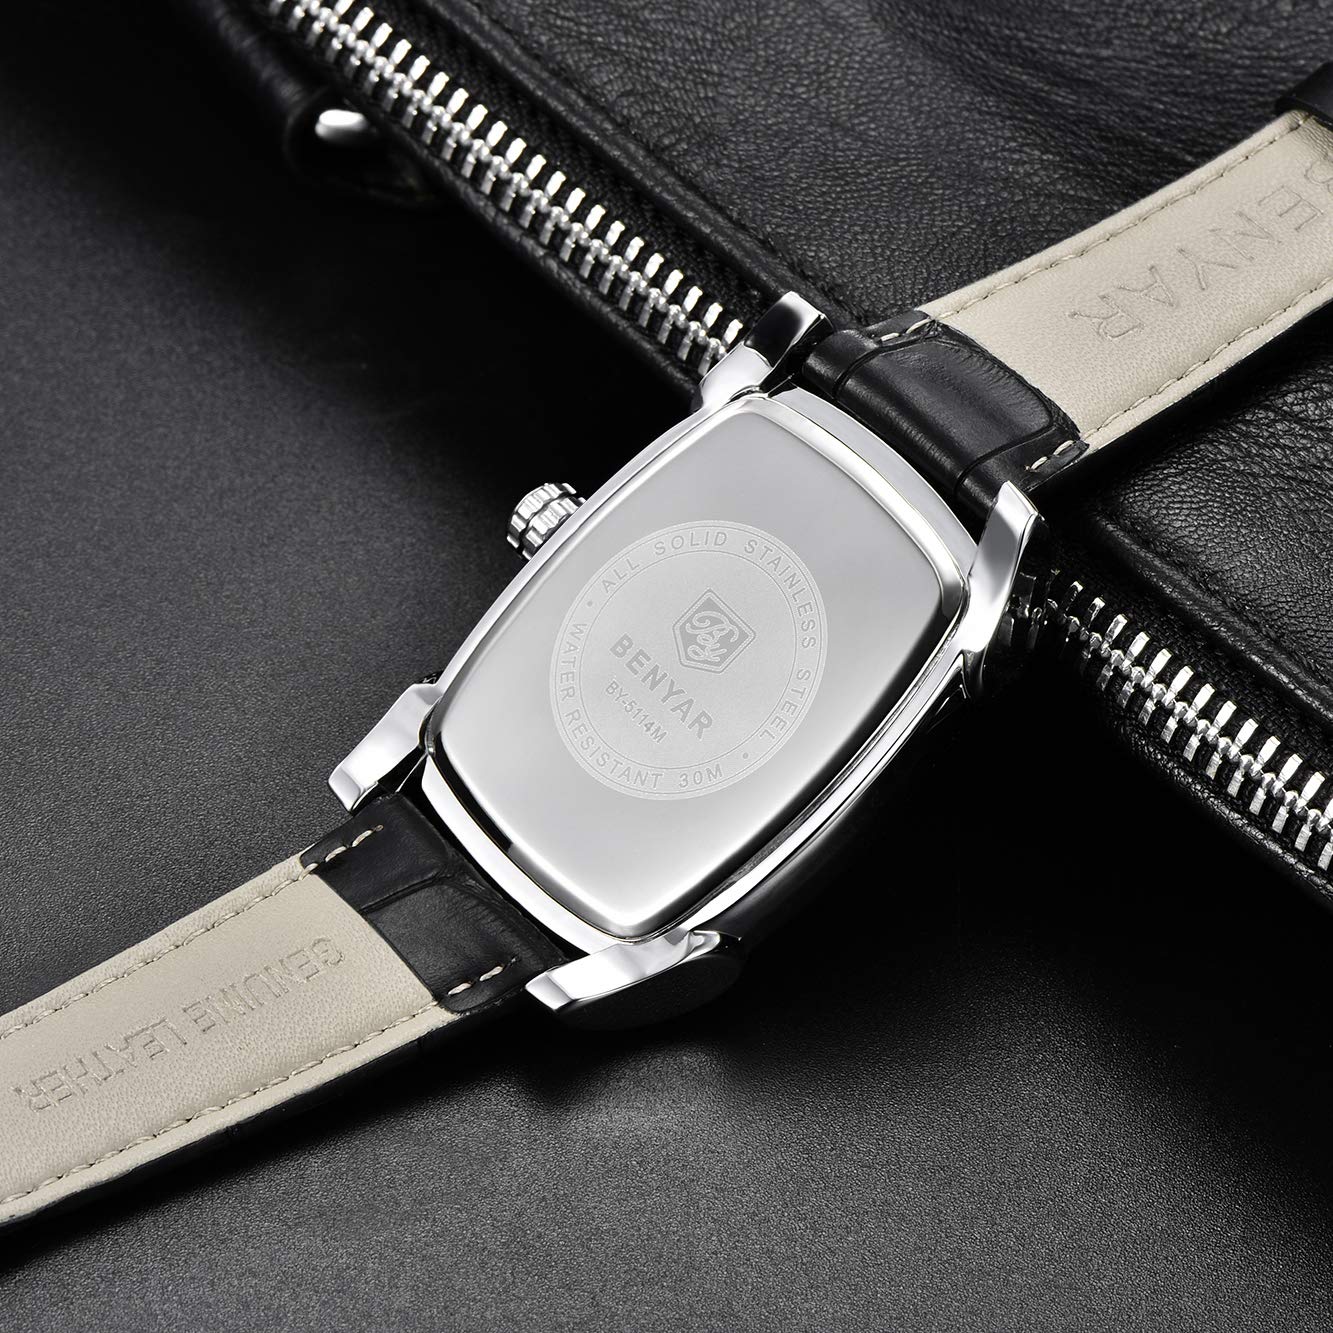 BENYAR Rectangle Wrist Watch for Men with Leather Strap, Men's Retro Fashion Casual Classic Watches Perfect Gifts for Friend